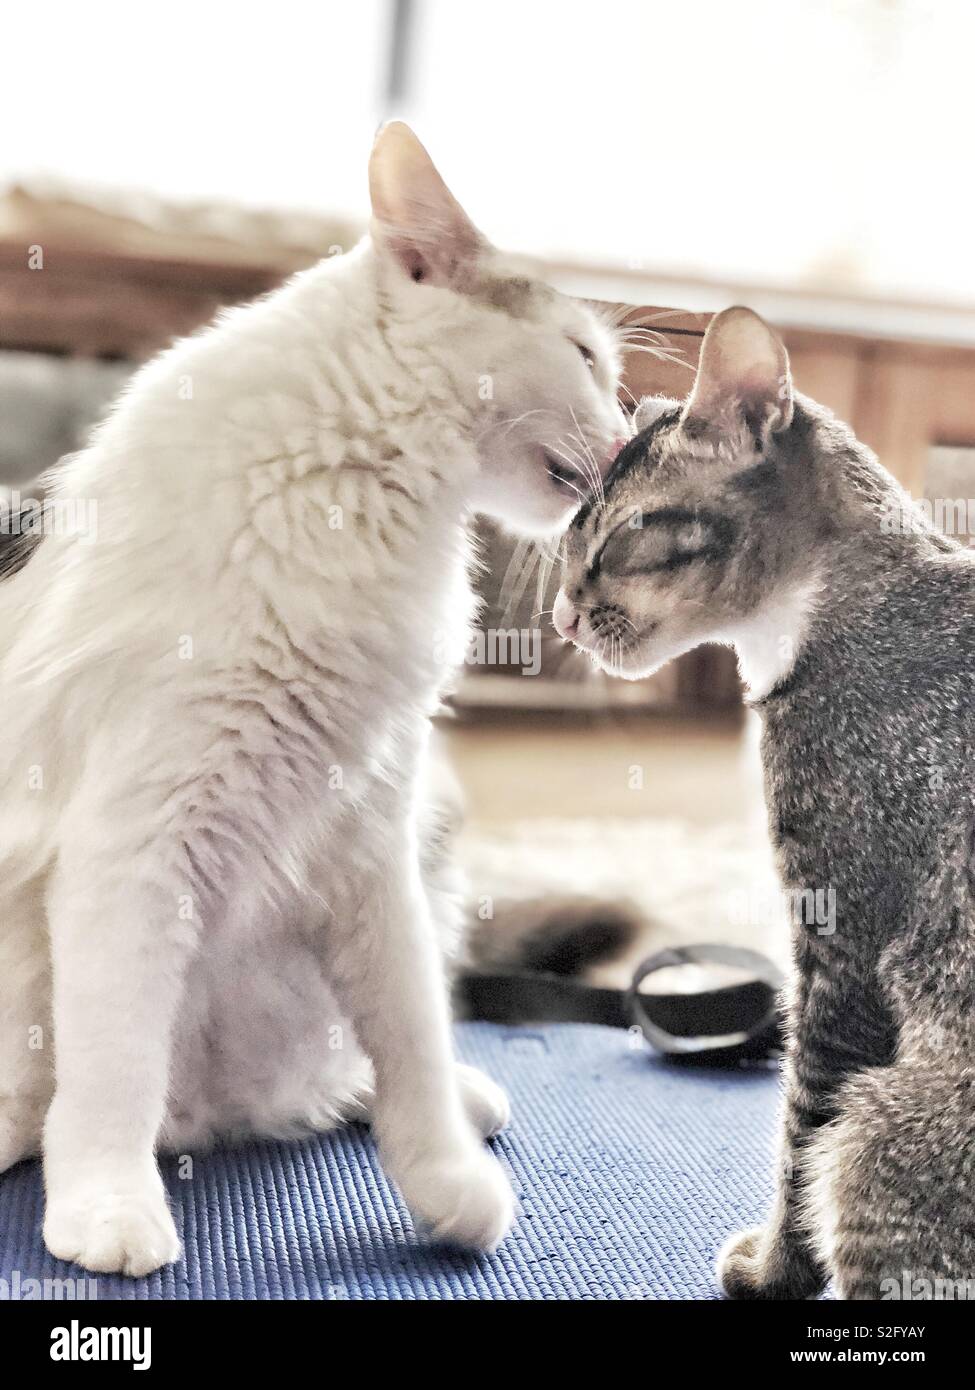 A mother cat grooming her kitten Stock Photo